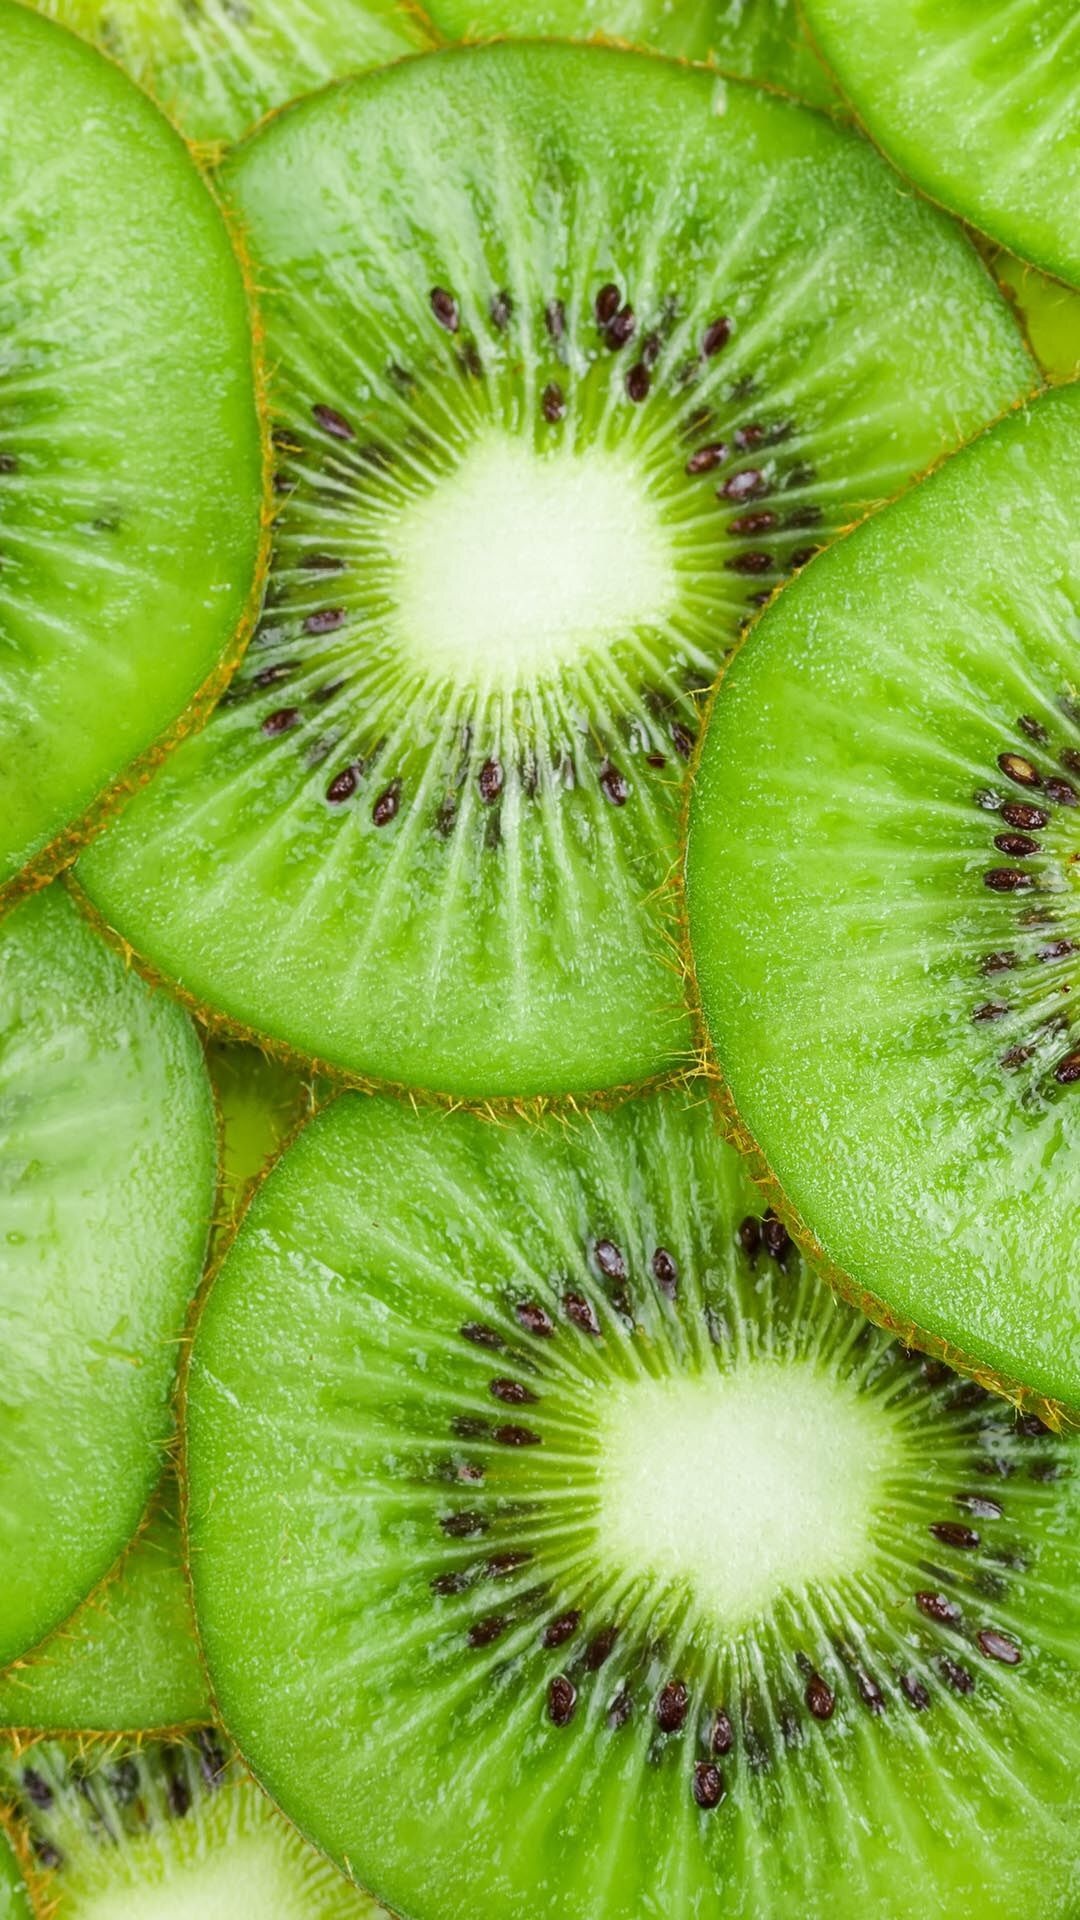 Cute kiwi wallpapers, Adorable designs, Playful fruit, Whimsical backgrounds, 1080x1920 Full HD Handy